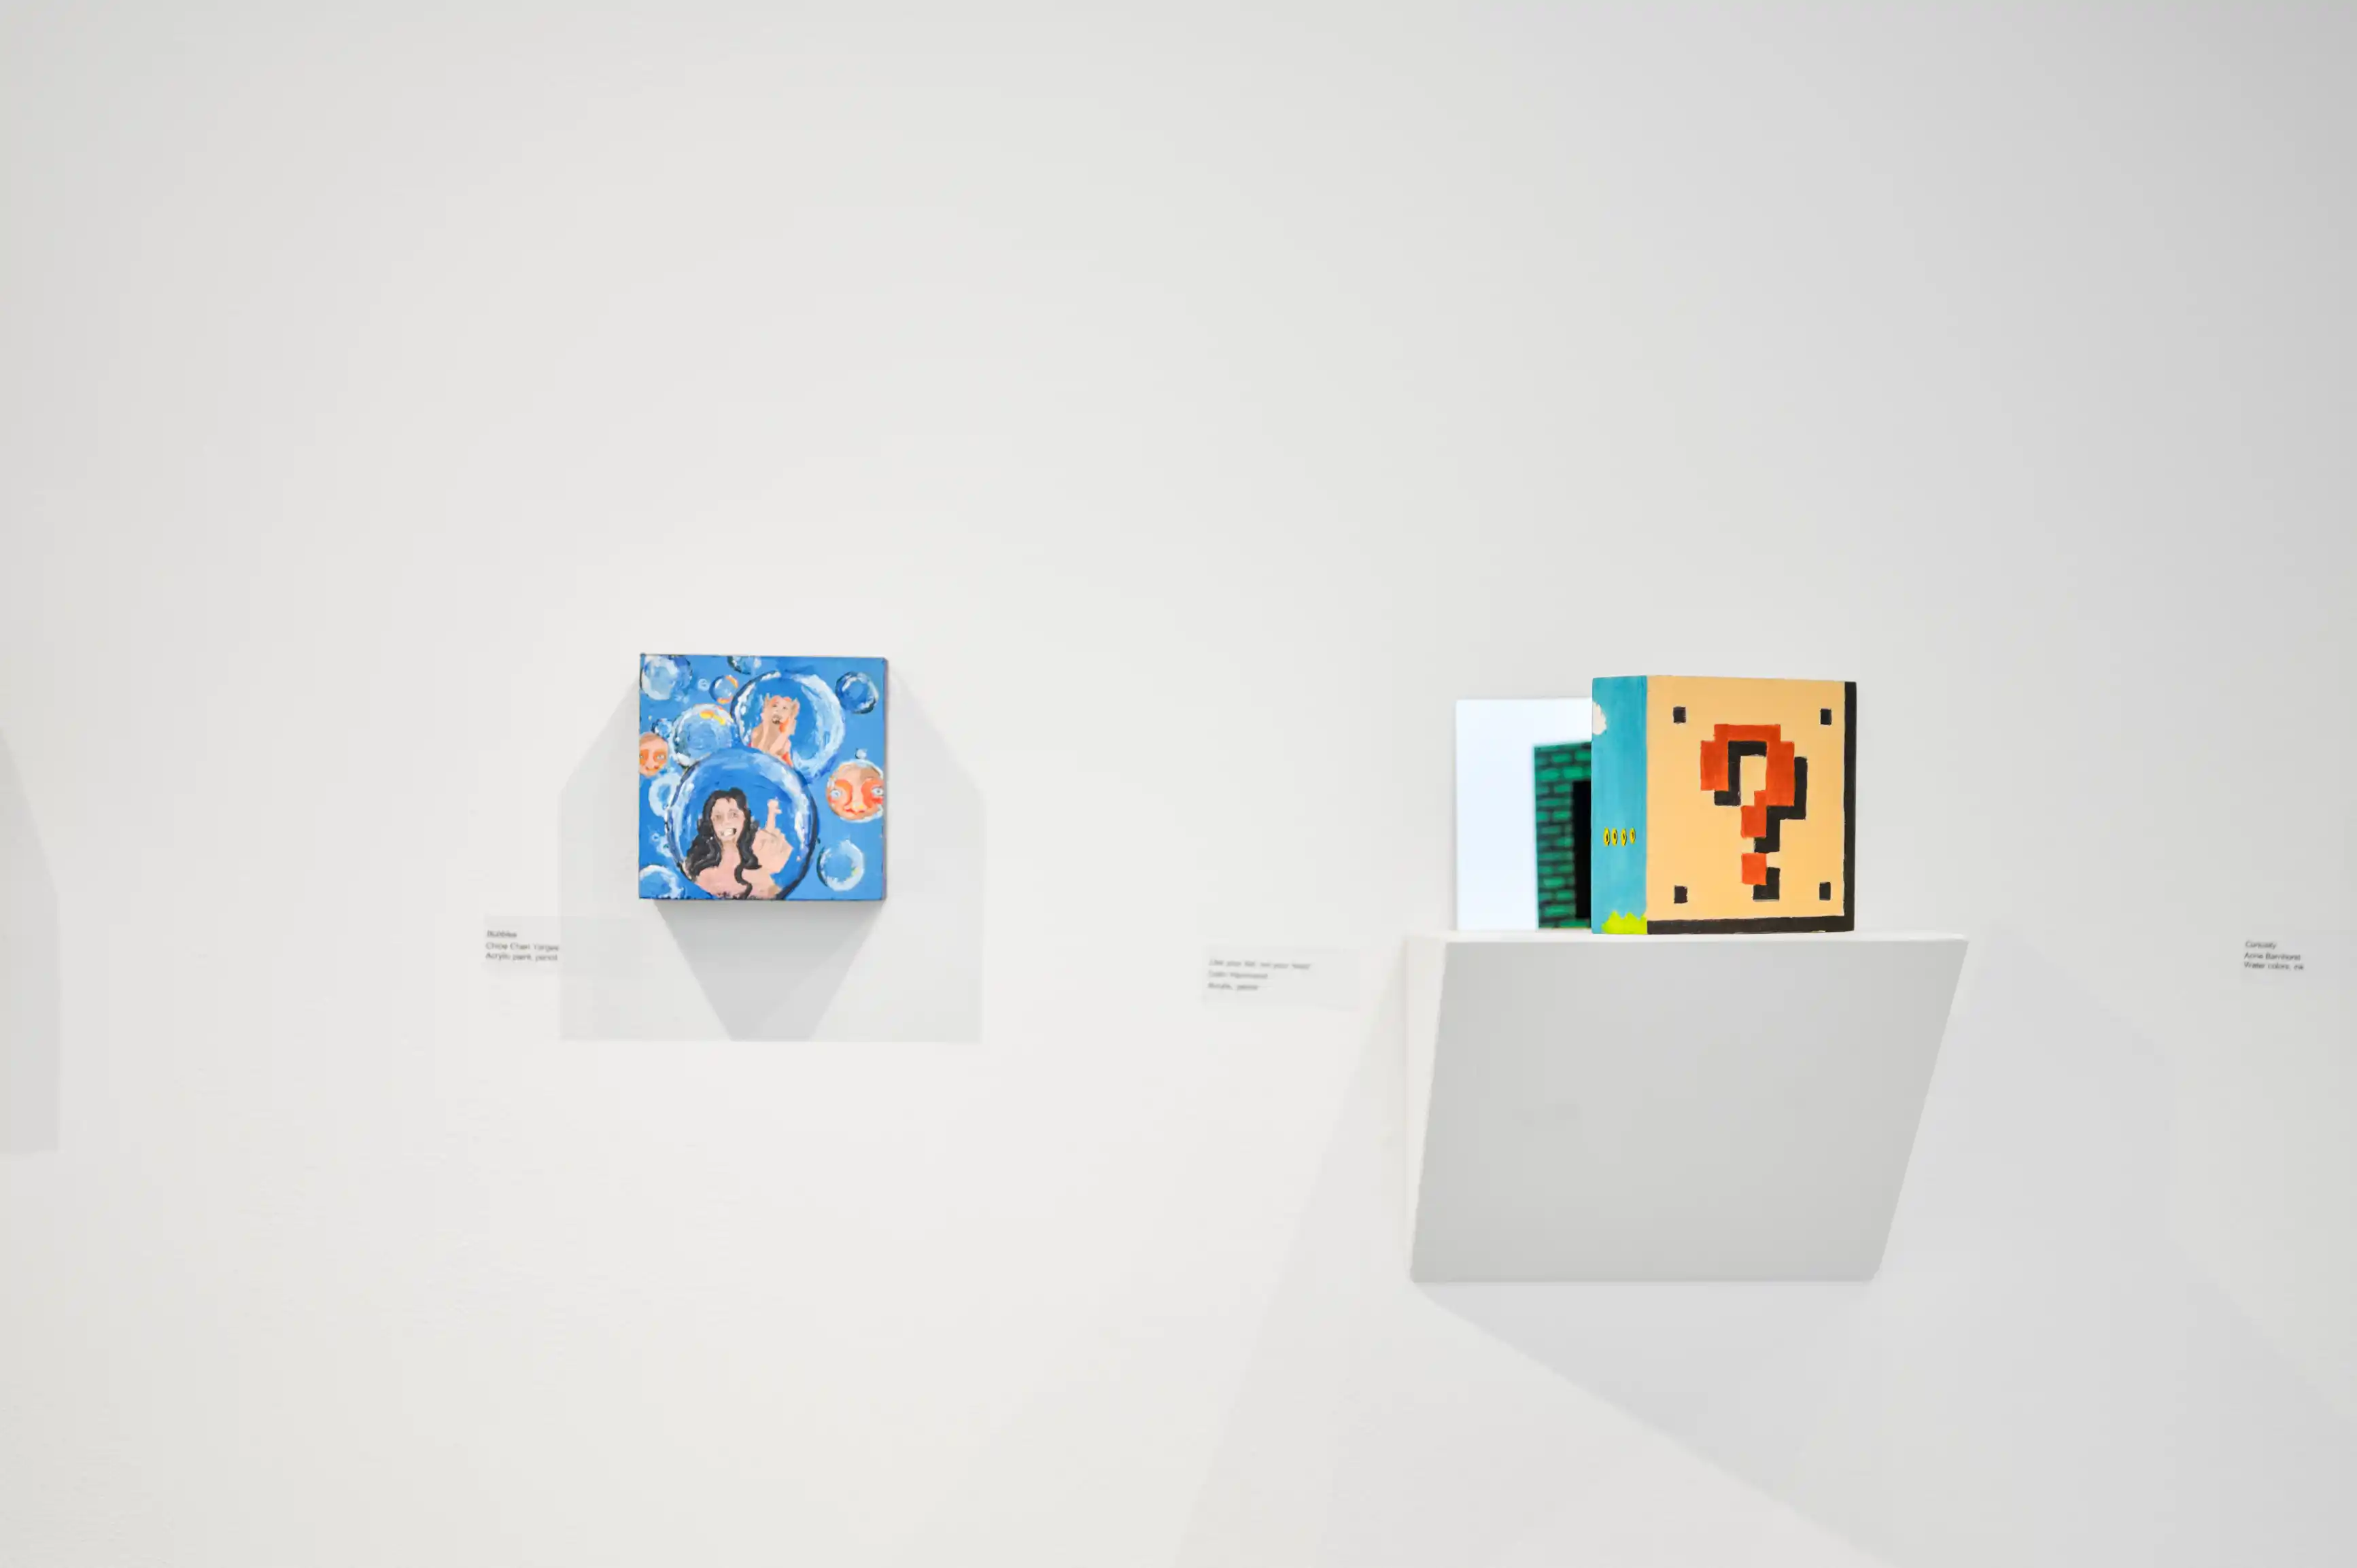 Art gallery wall displaying two colorful paintings, one featuring an abstract blue and orange design resembling a question mark, and another with a figurative depiction amidst blue swirls and orange spheres.